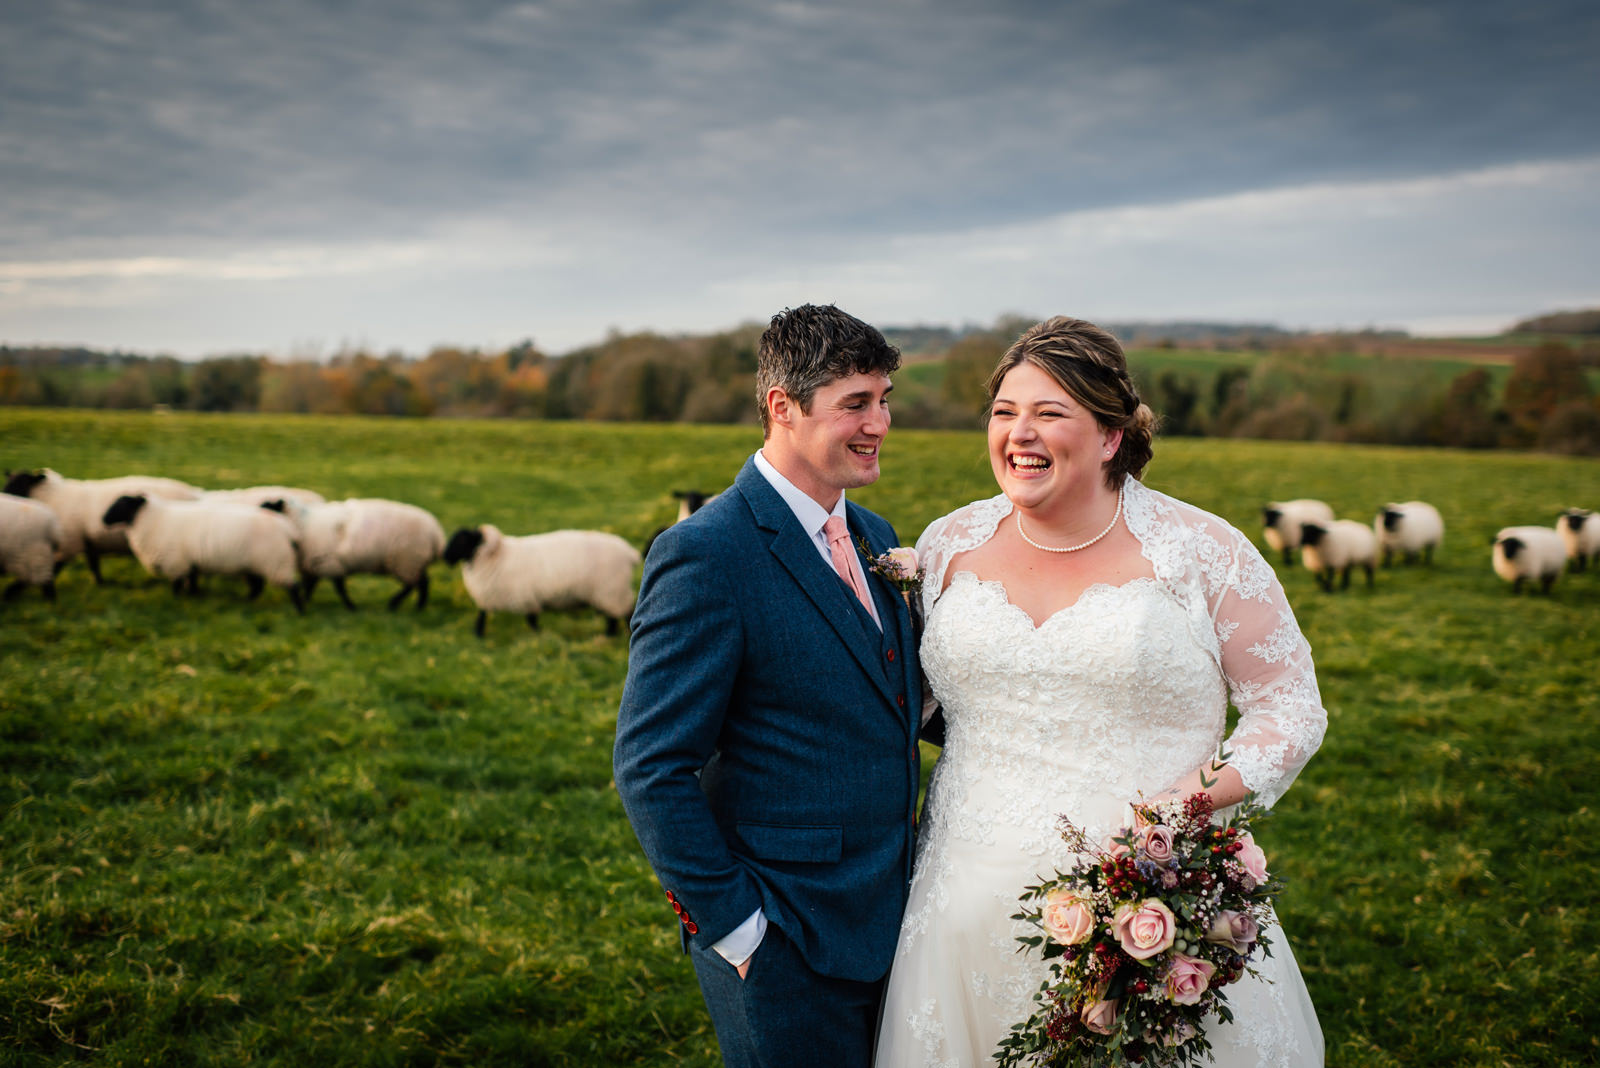 bride and groom in a field of sheep